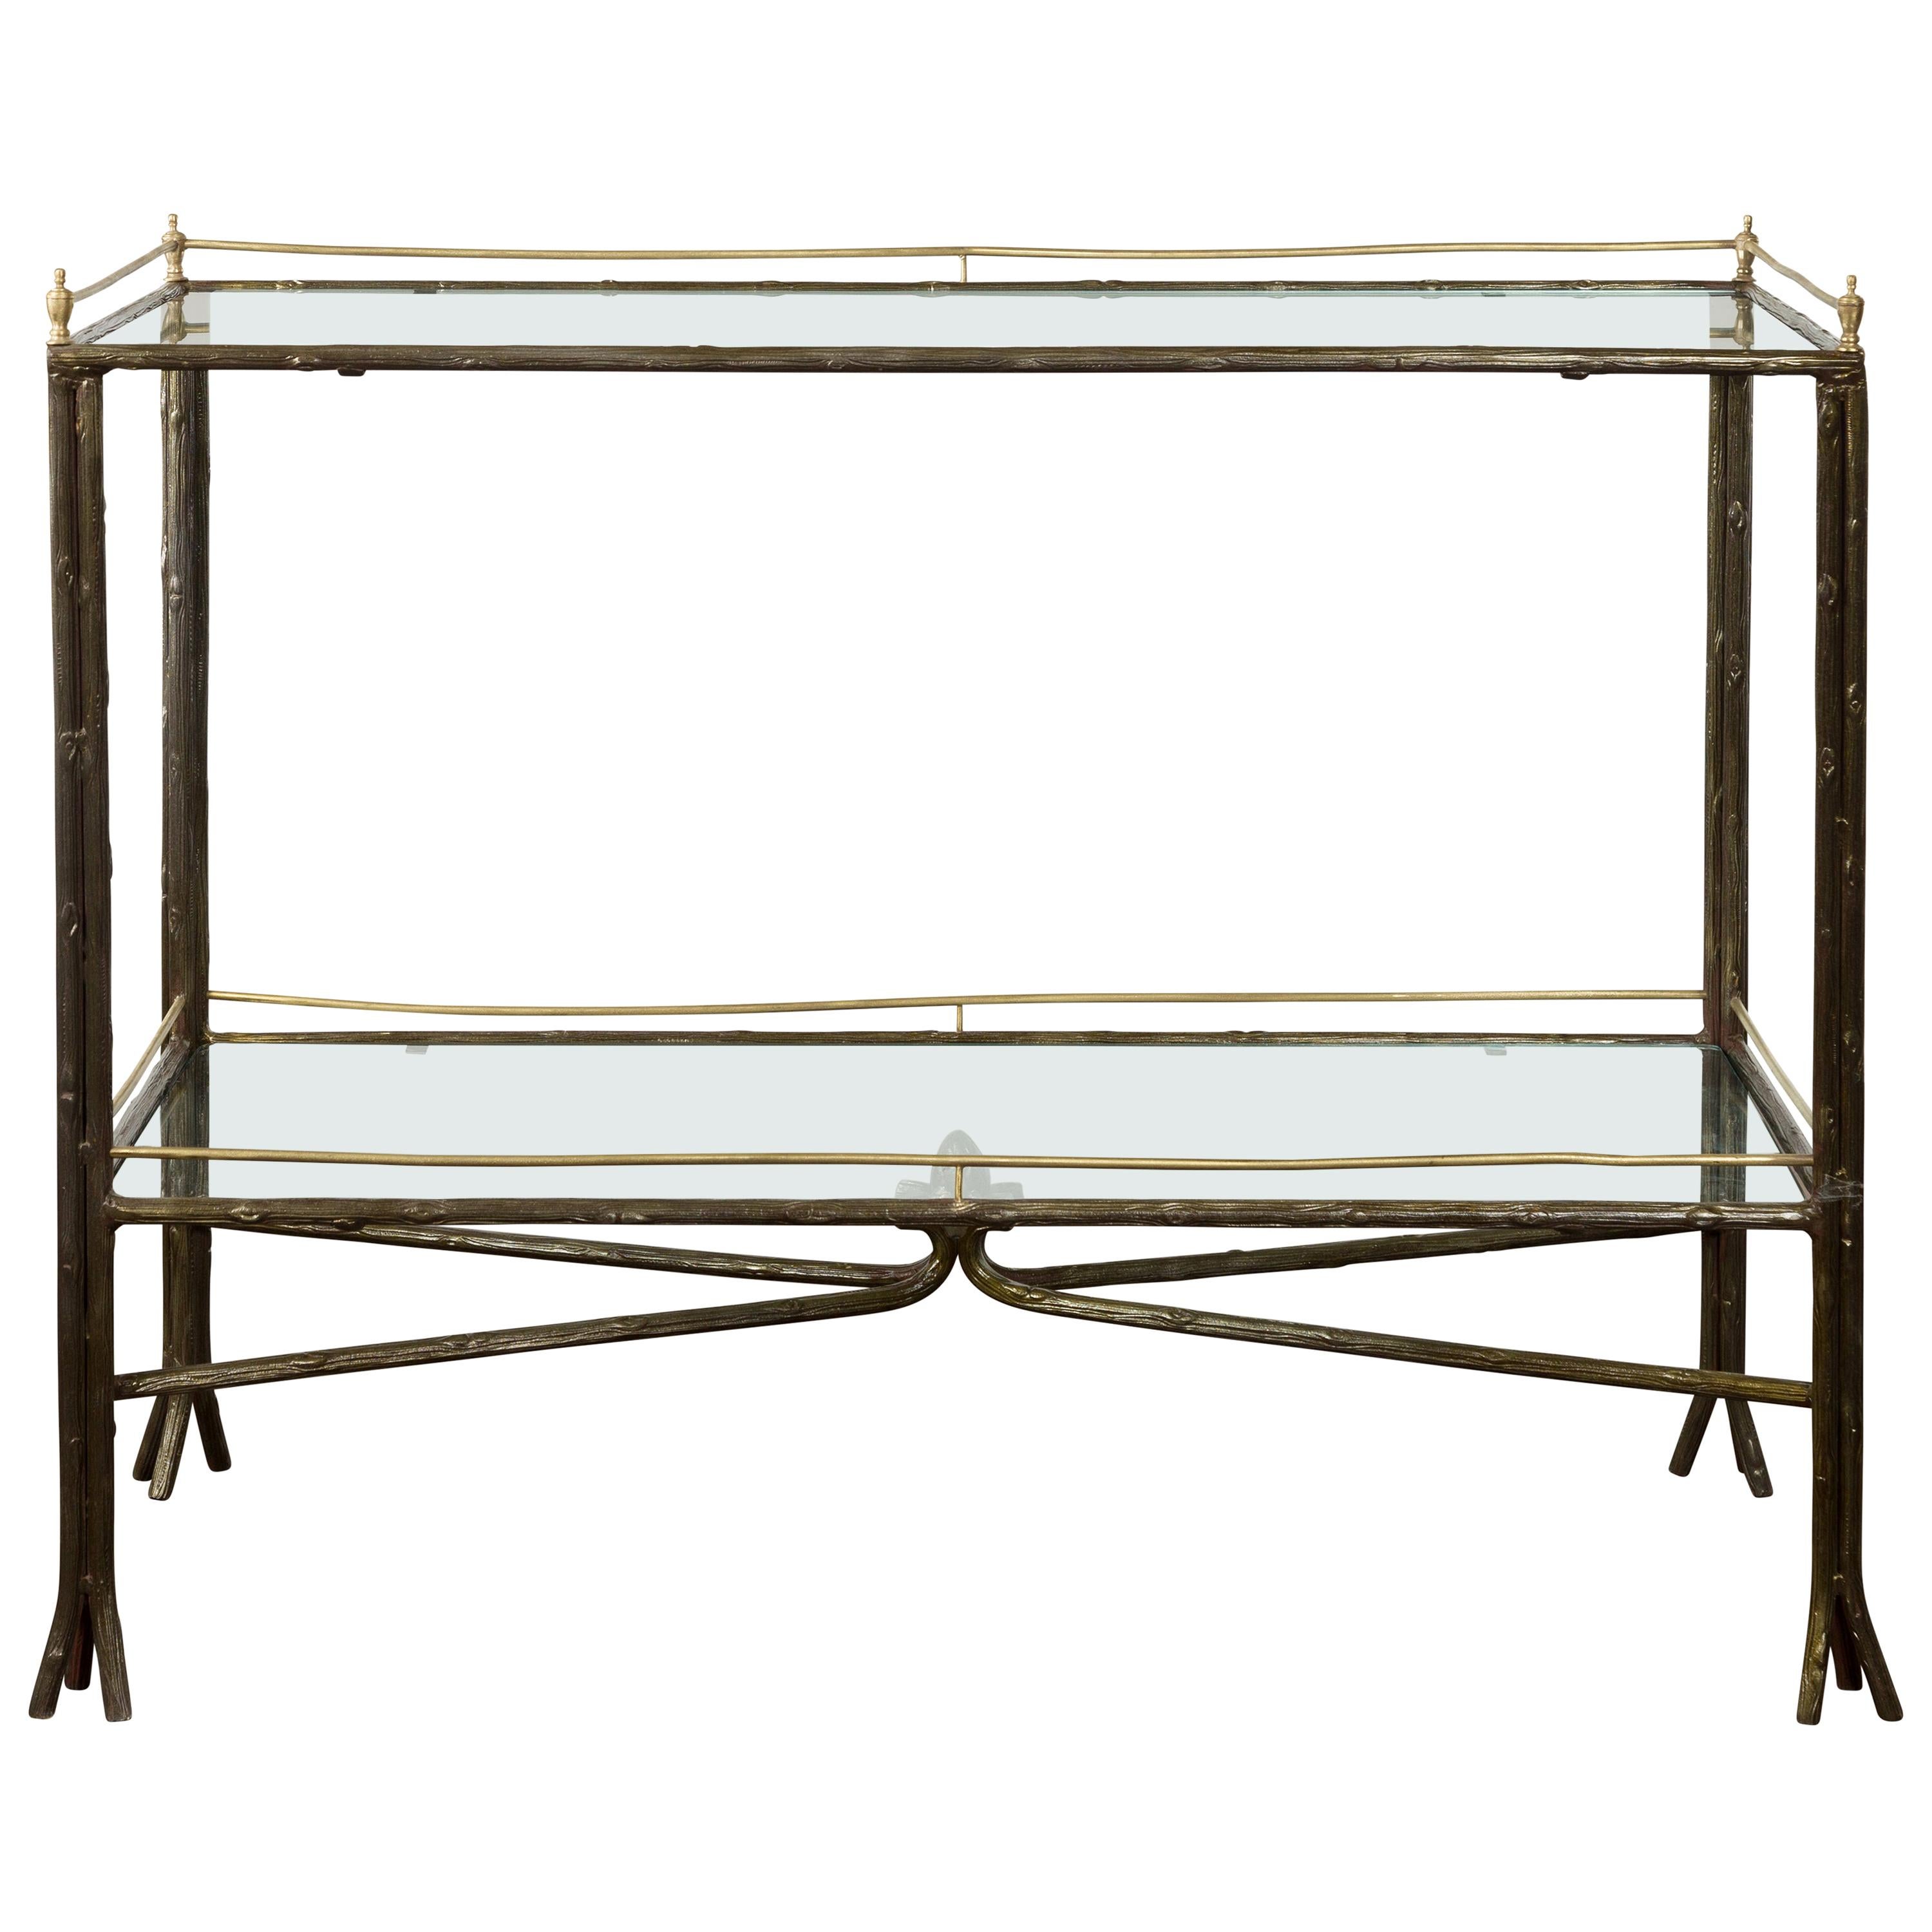 Midcentury Italian Steel and Brass Faux Bois Table with Glass Top and Shelf